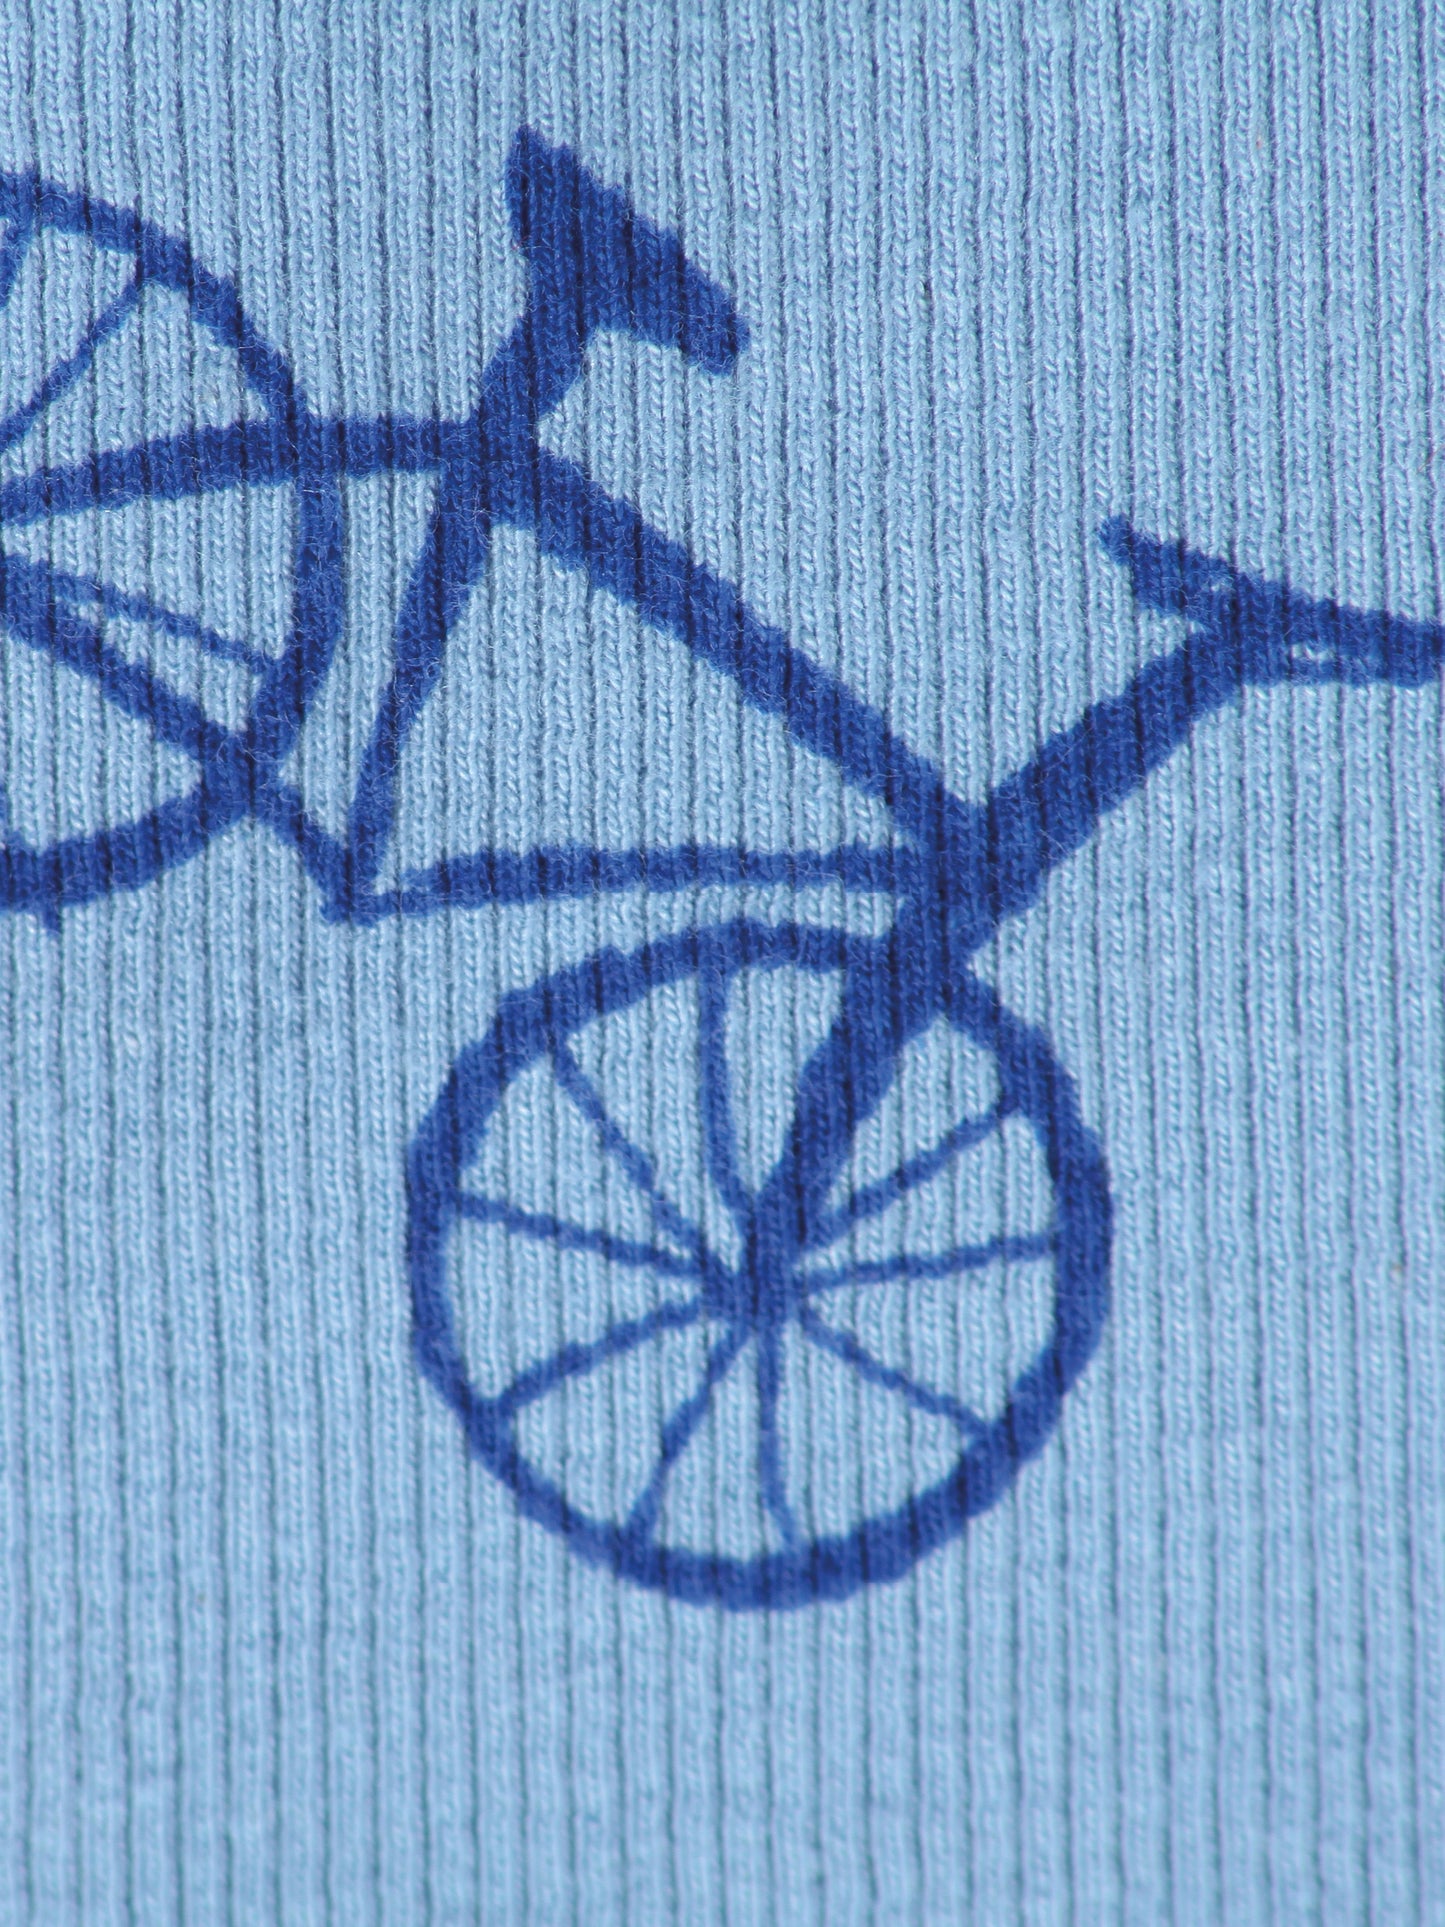 Bicycle All Over Sleeveless Body